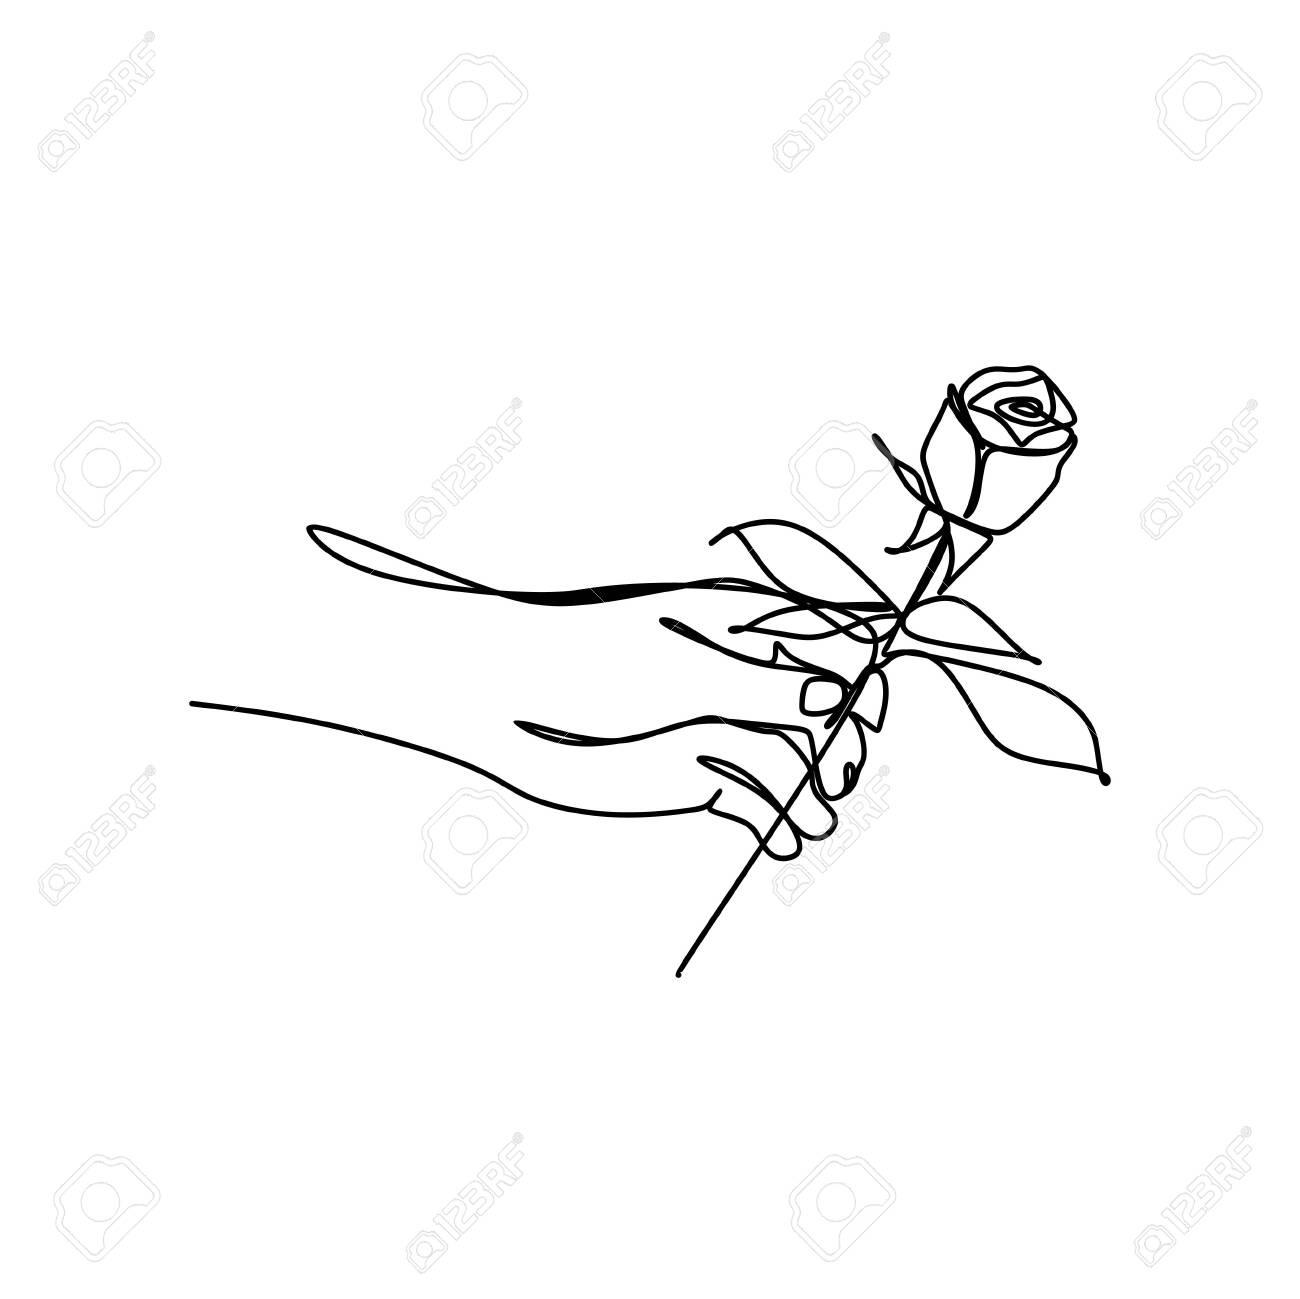 Single Continuous Line Drawing Of Rose Flower Minimalist Design